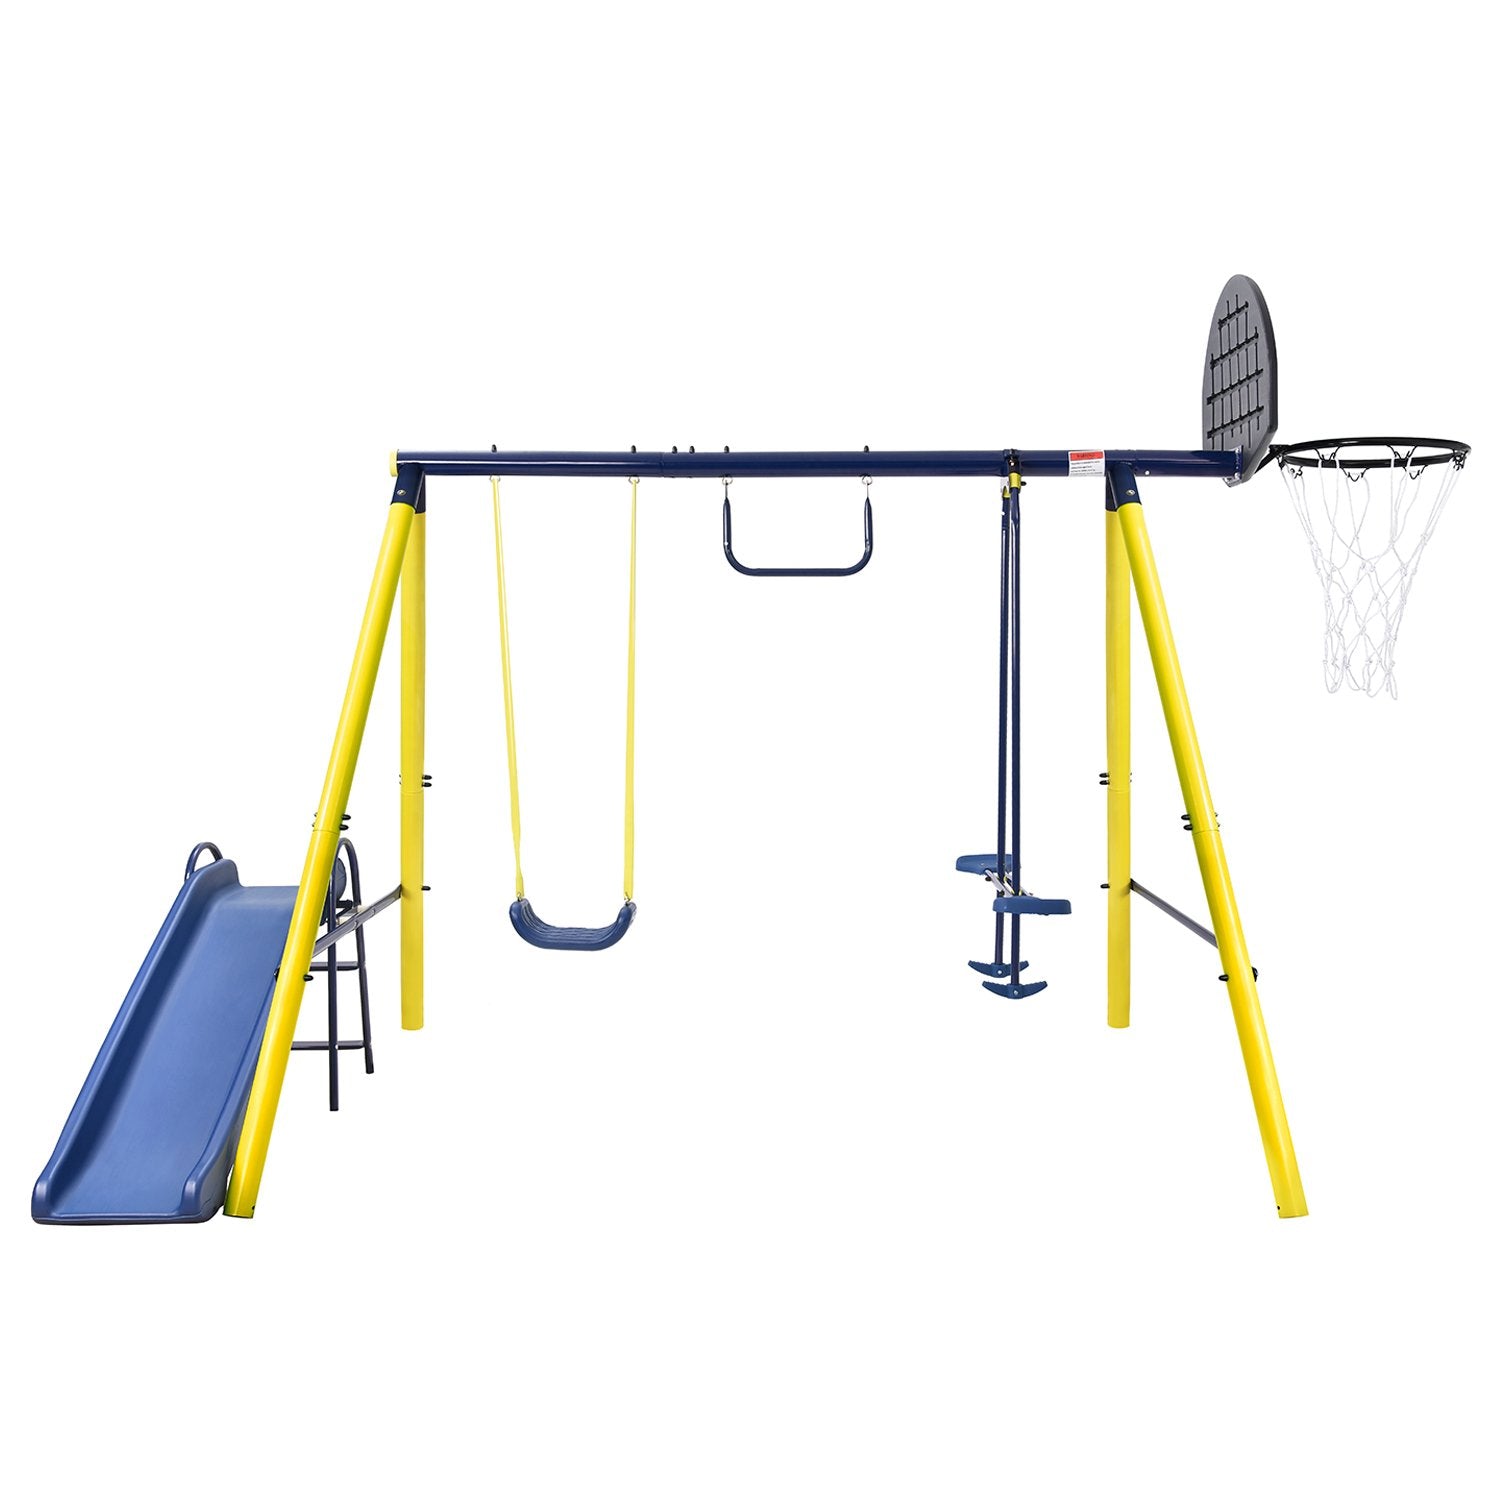 5 in 1 Outdoor Toddler Swing Set with Steel Frame